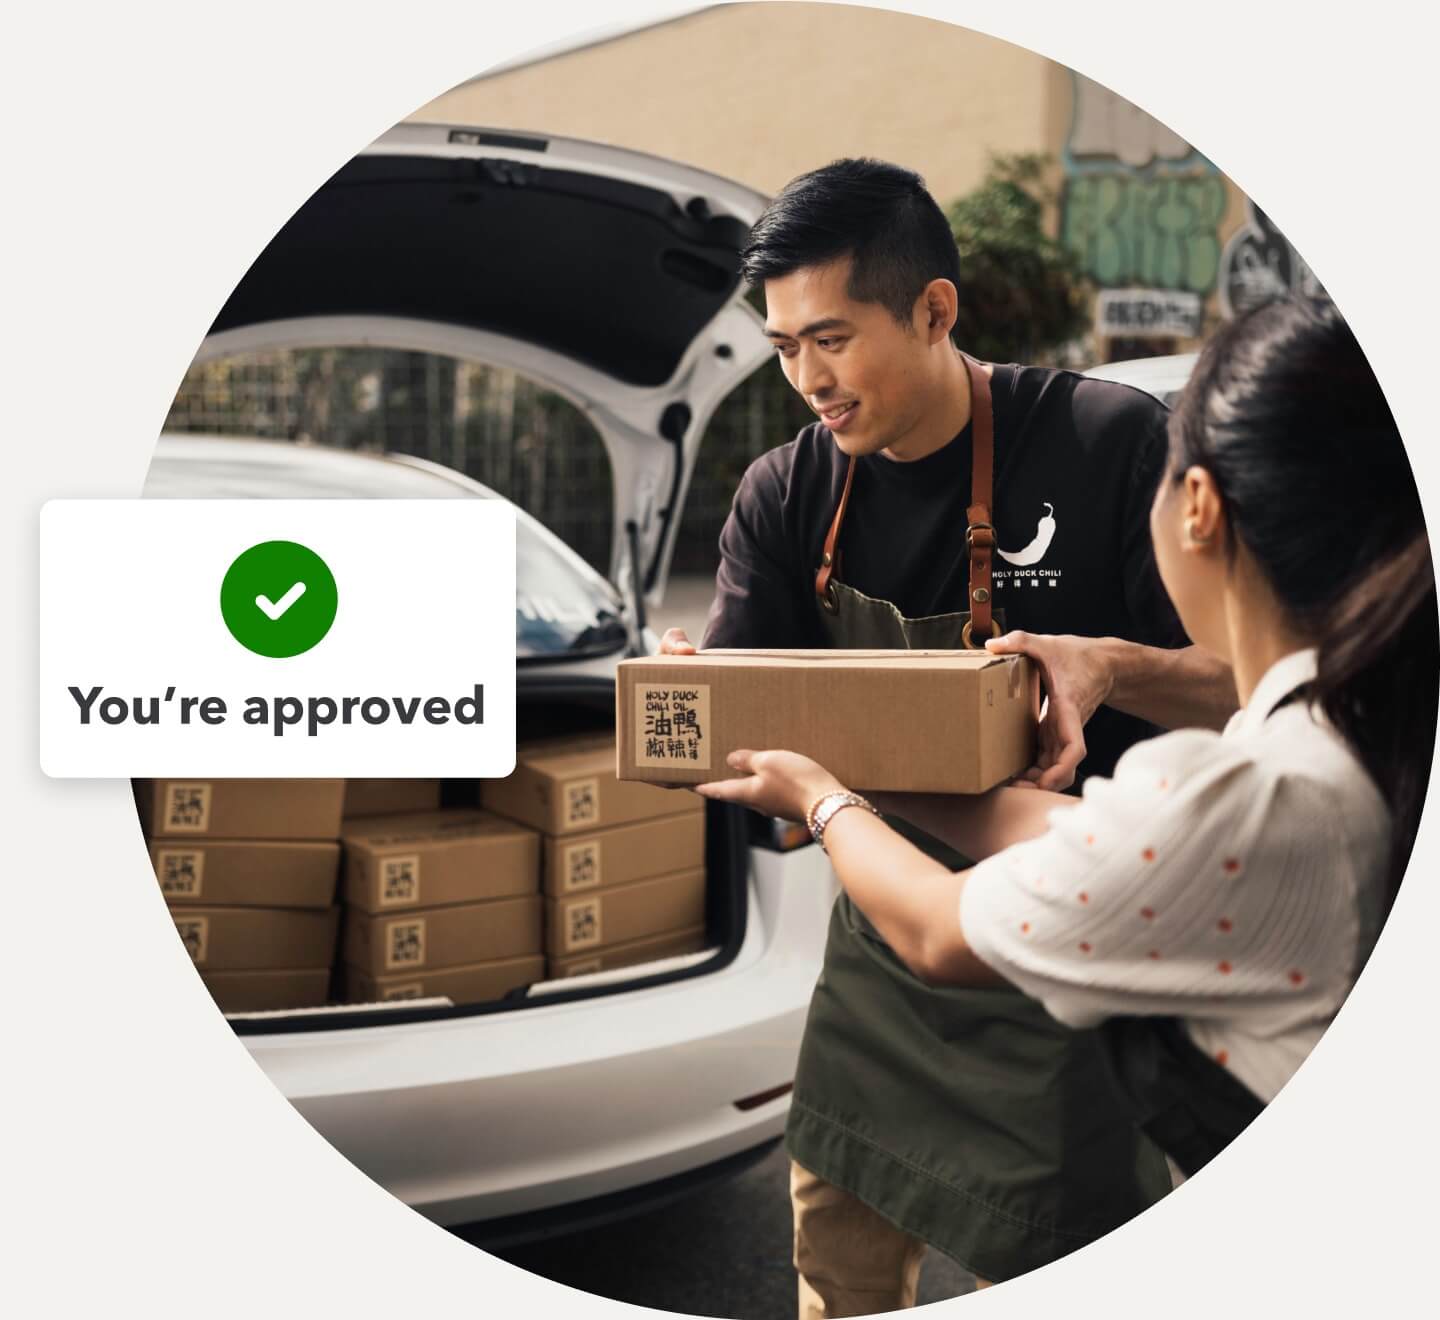 Business owner loads merchandise into a car while QuickBooks shows a notification for approved funding.